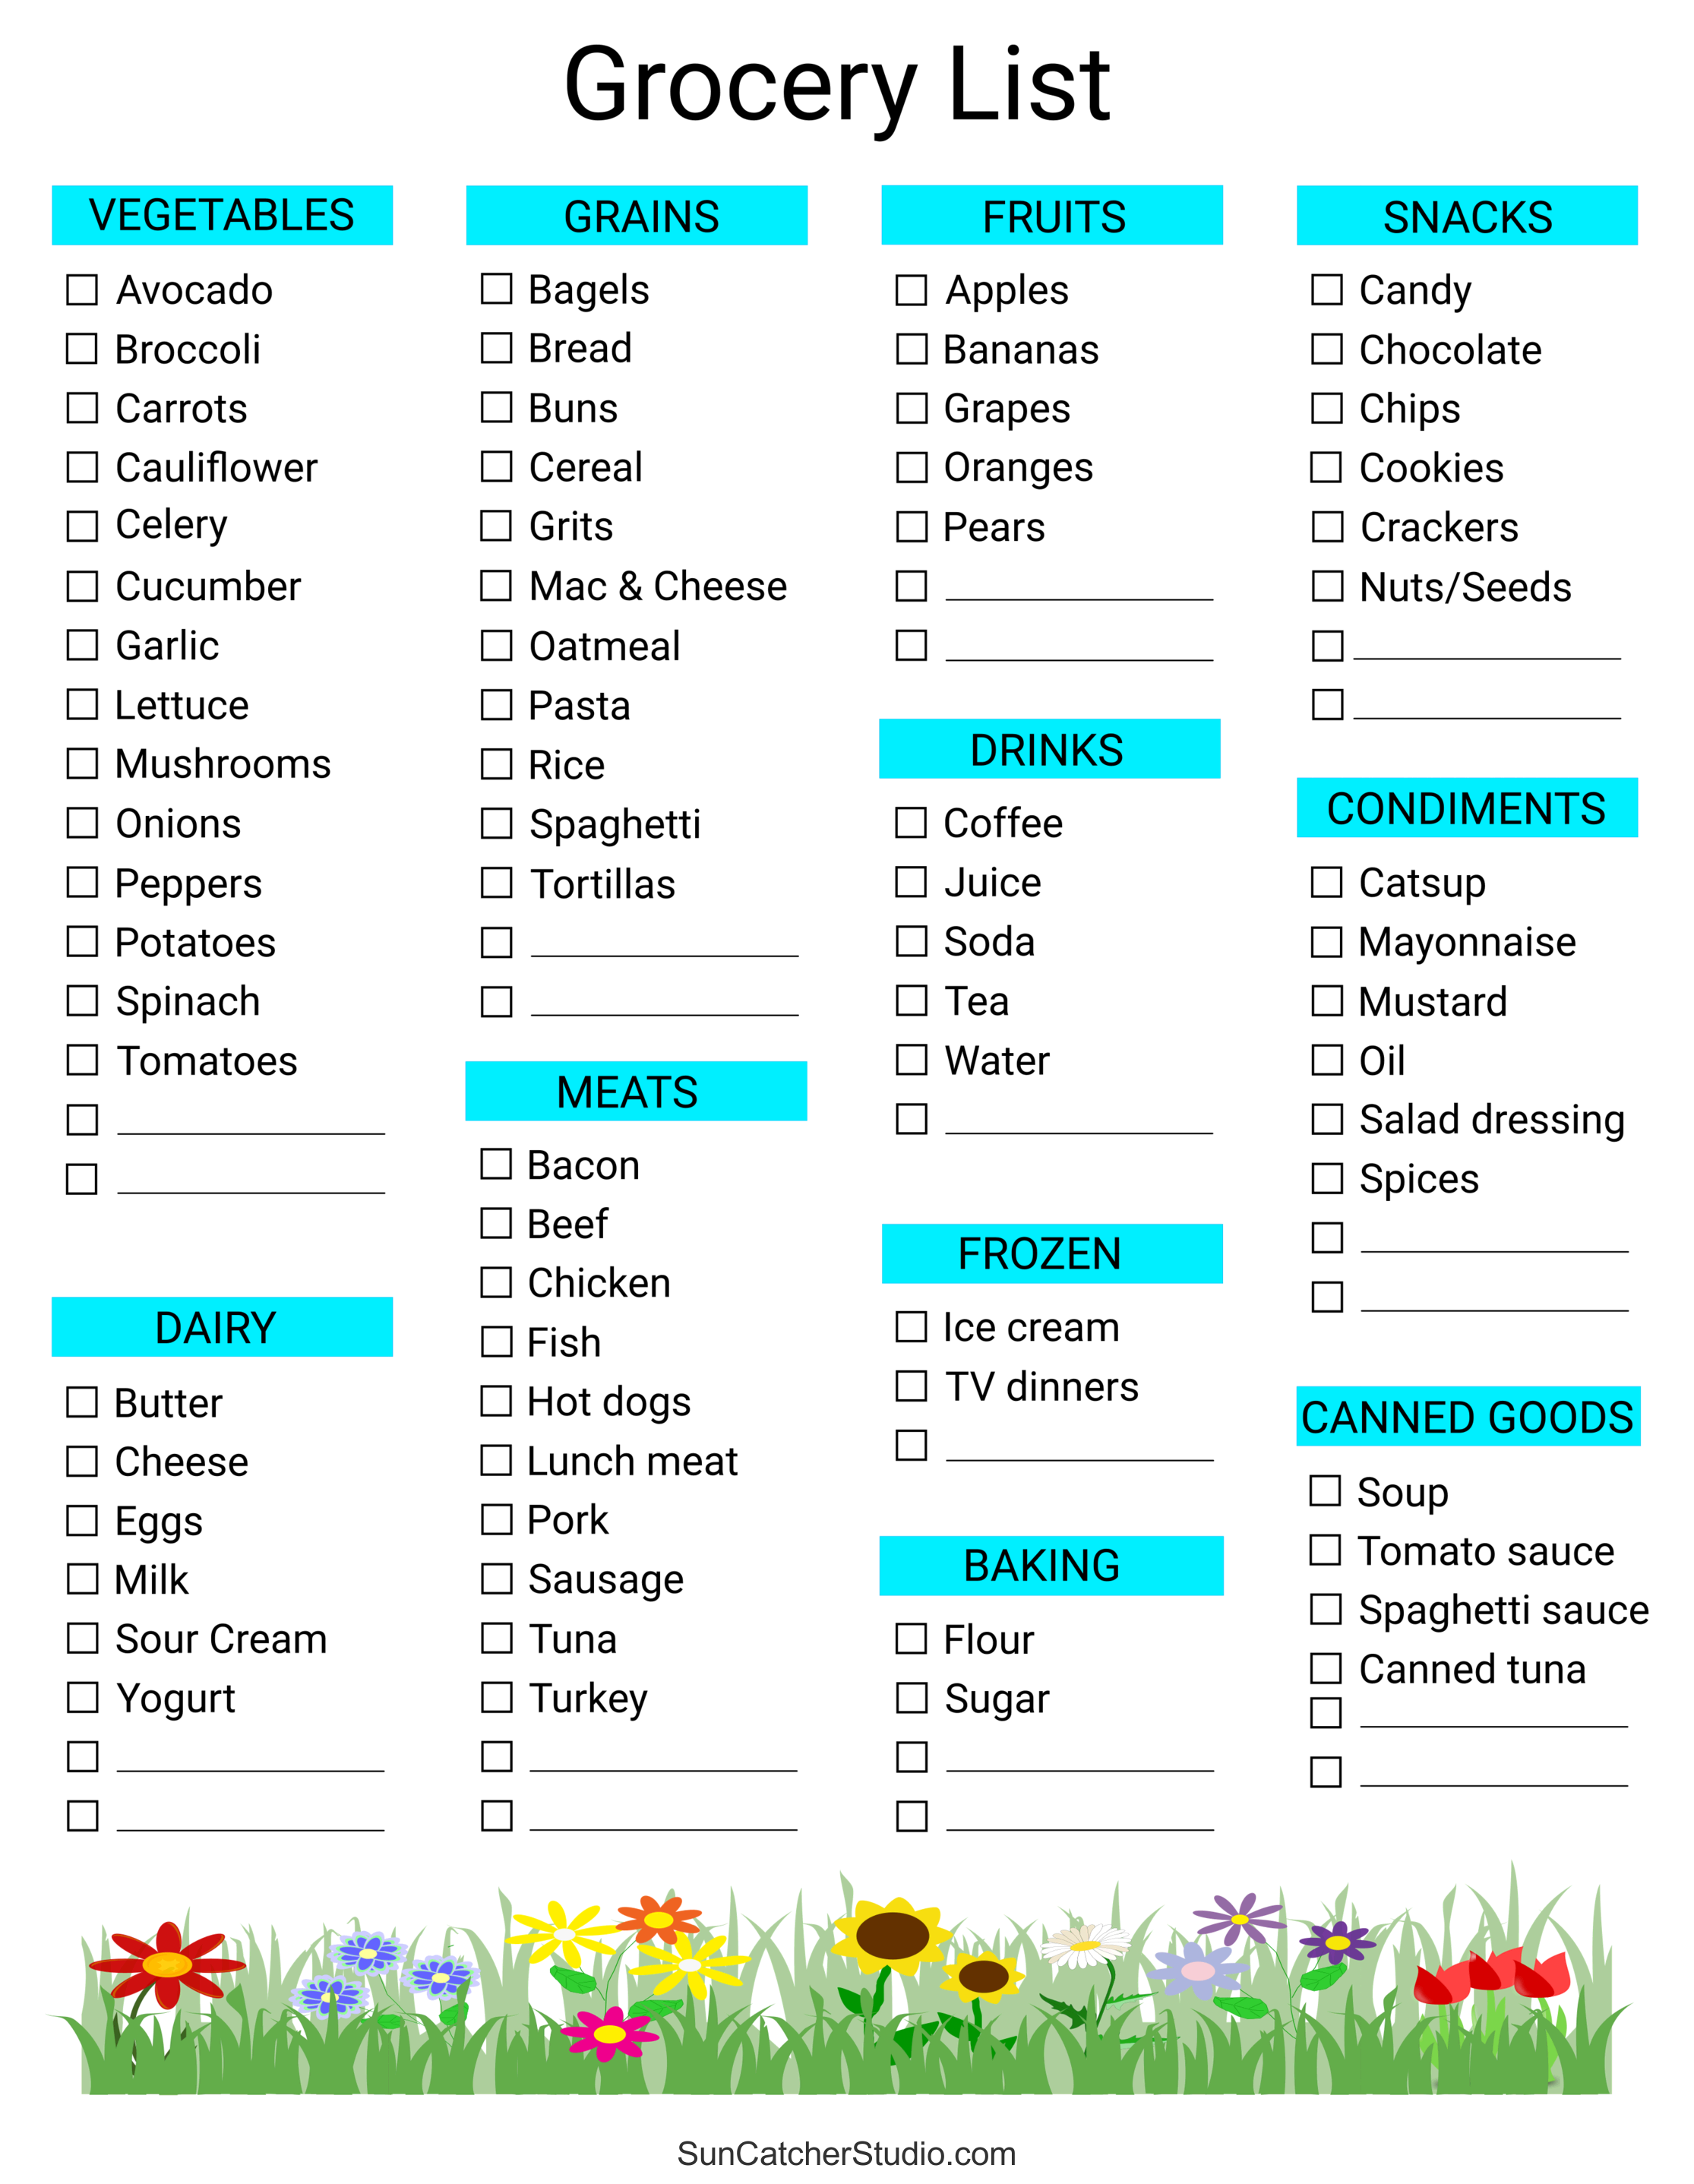 Free Printable Grocery List By Category 1 010101 00eeff 